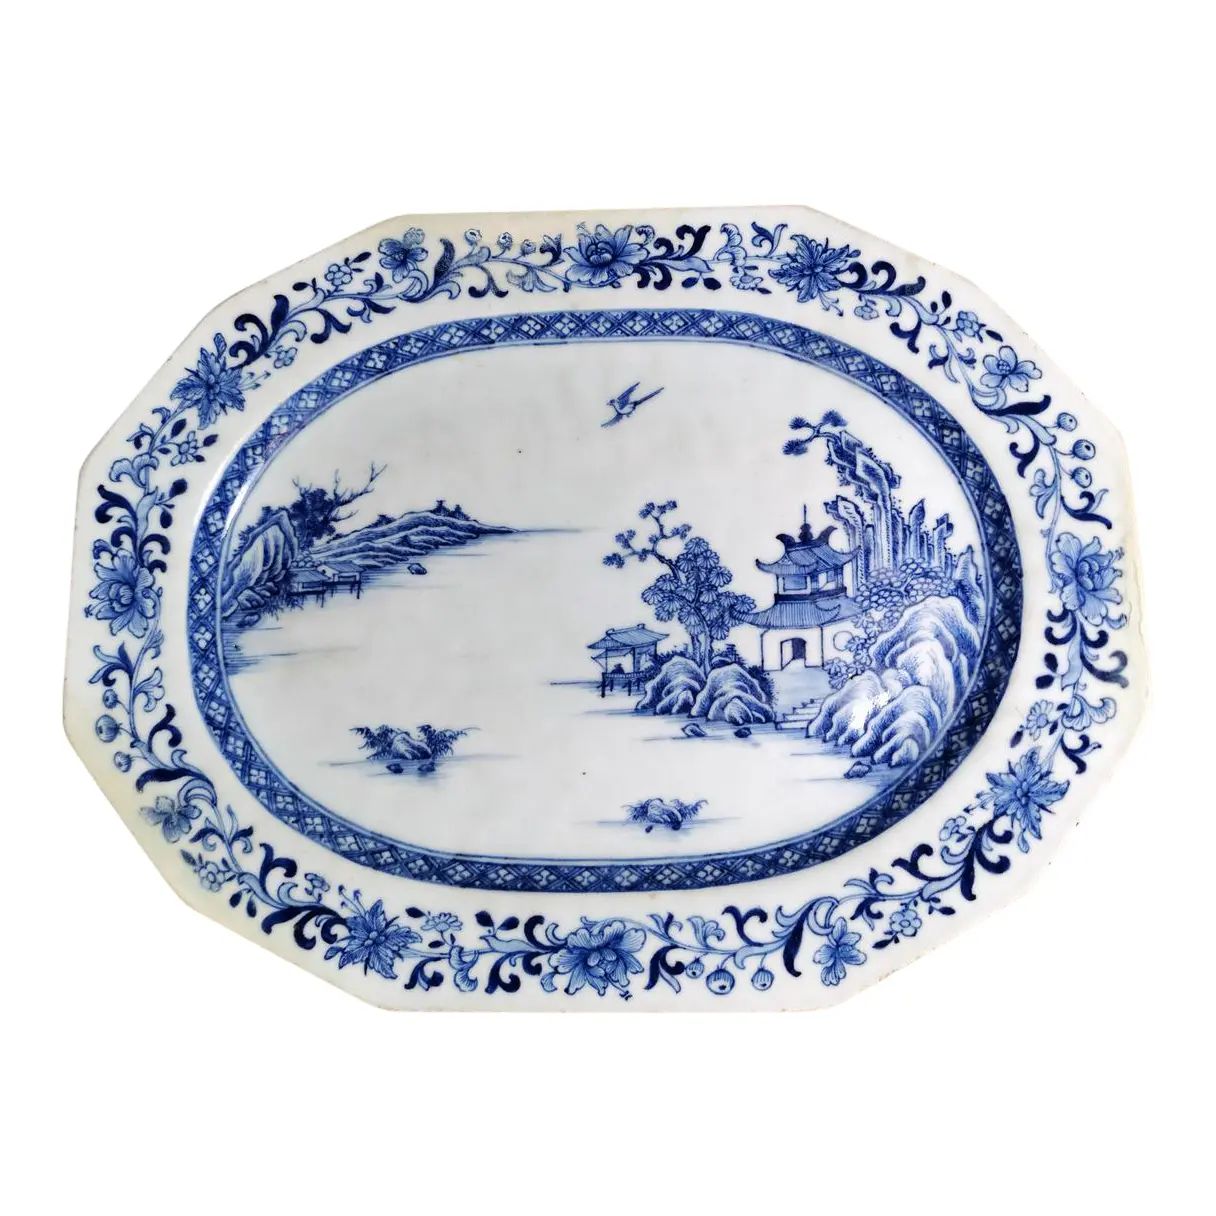 Mid 18th Century Chinese Handpainted Blue and White Porcelain Tray | Chairish